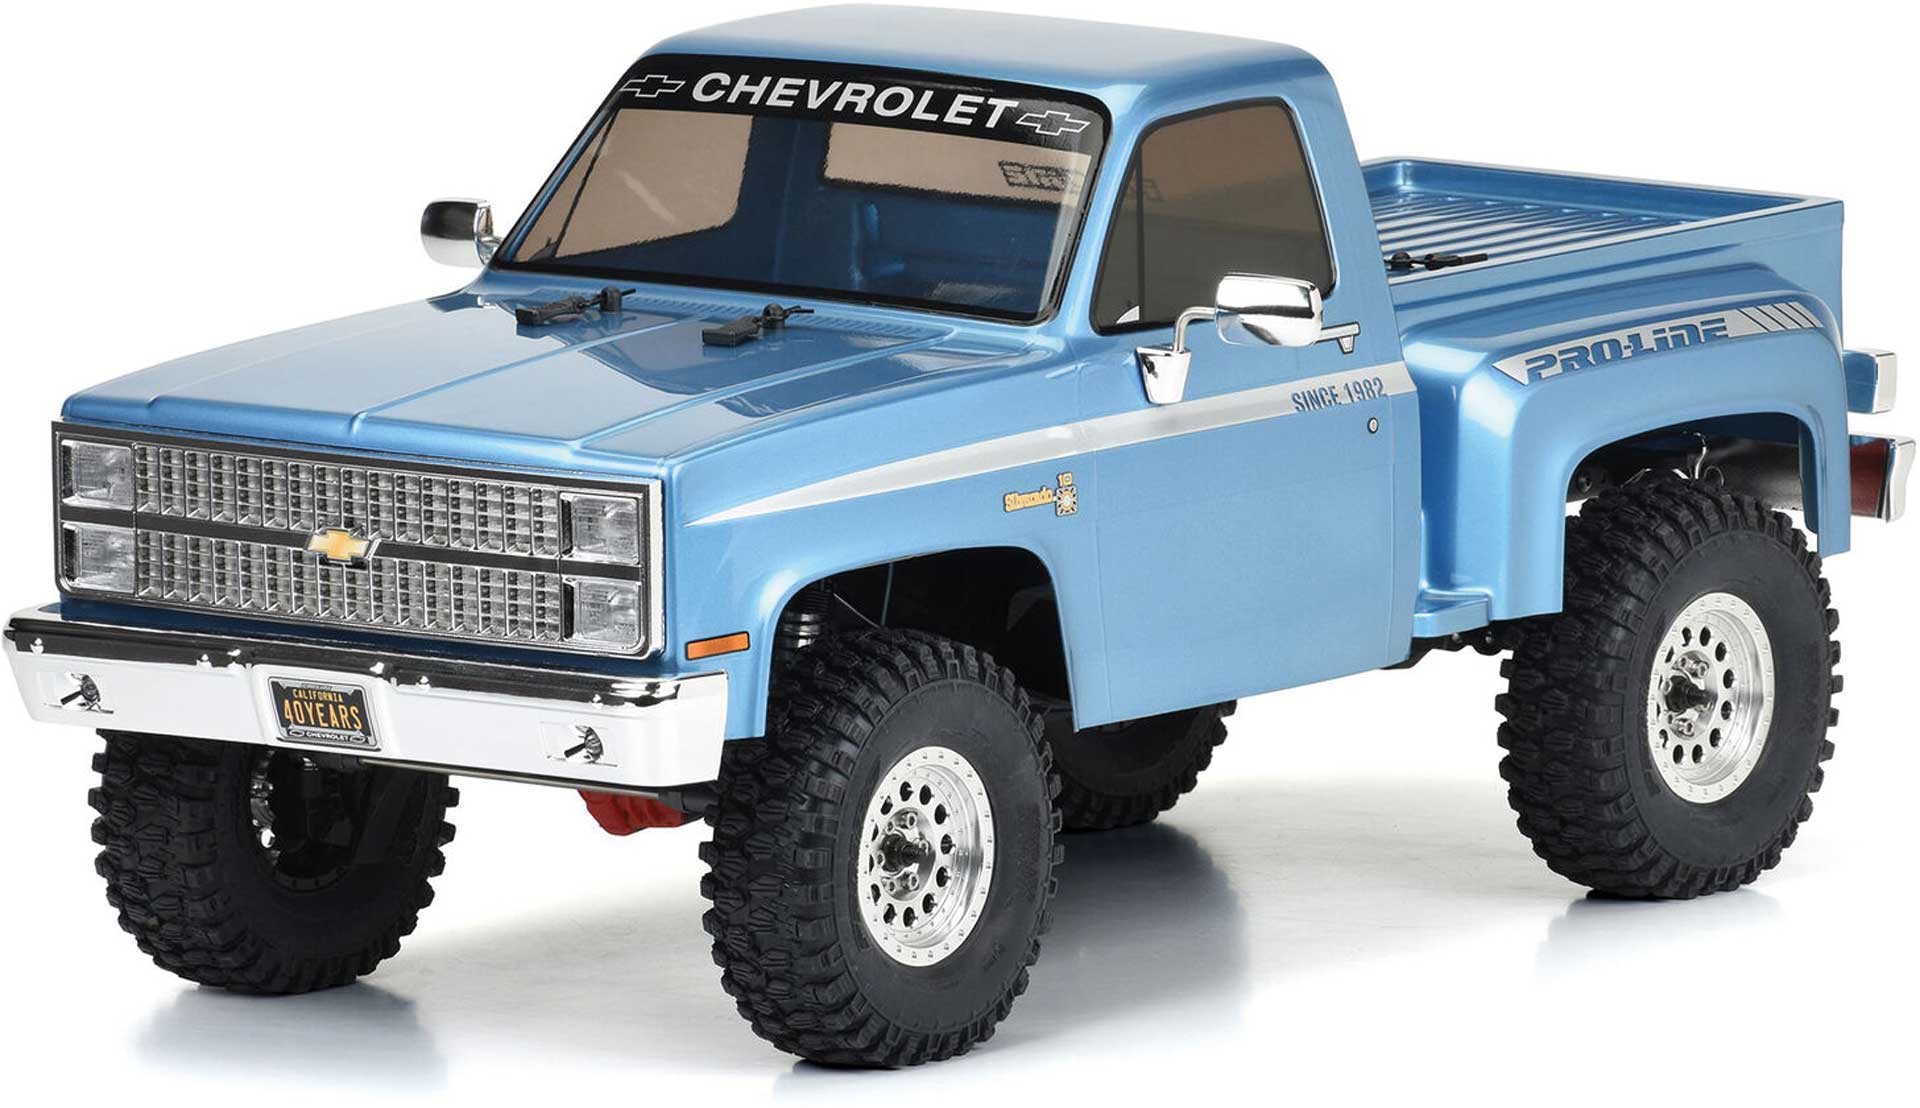 AXIAL SCX10 III Base Camp Proline 82 Chevy K10 Chevrolet K10 4WD Rock Crawler Brushed